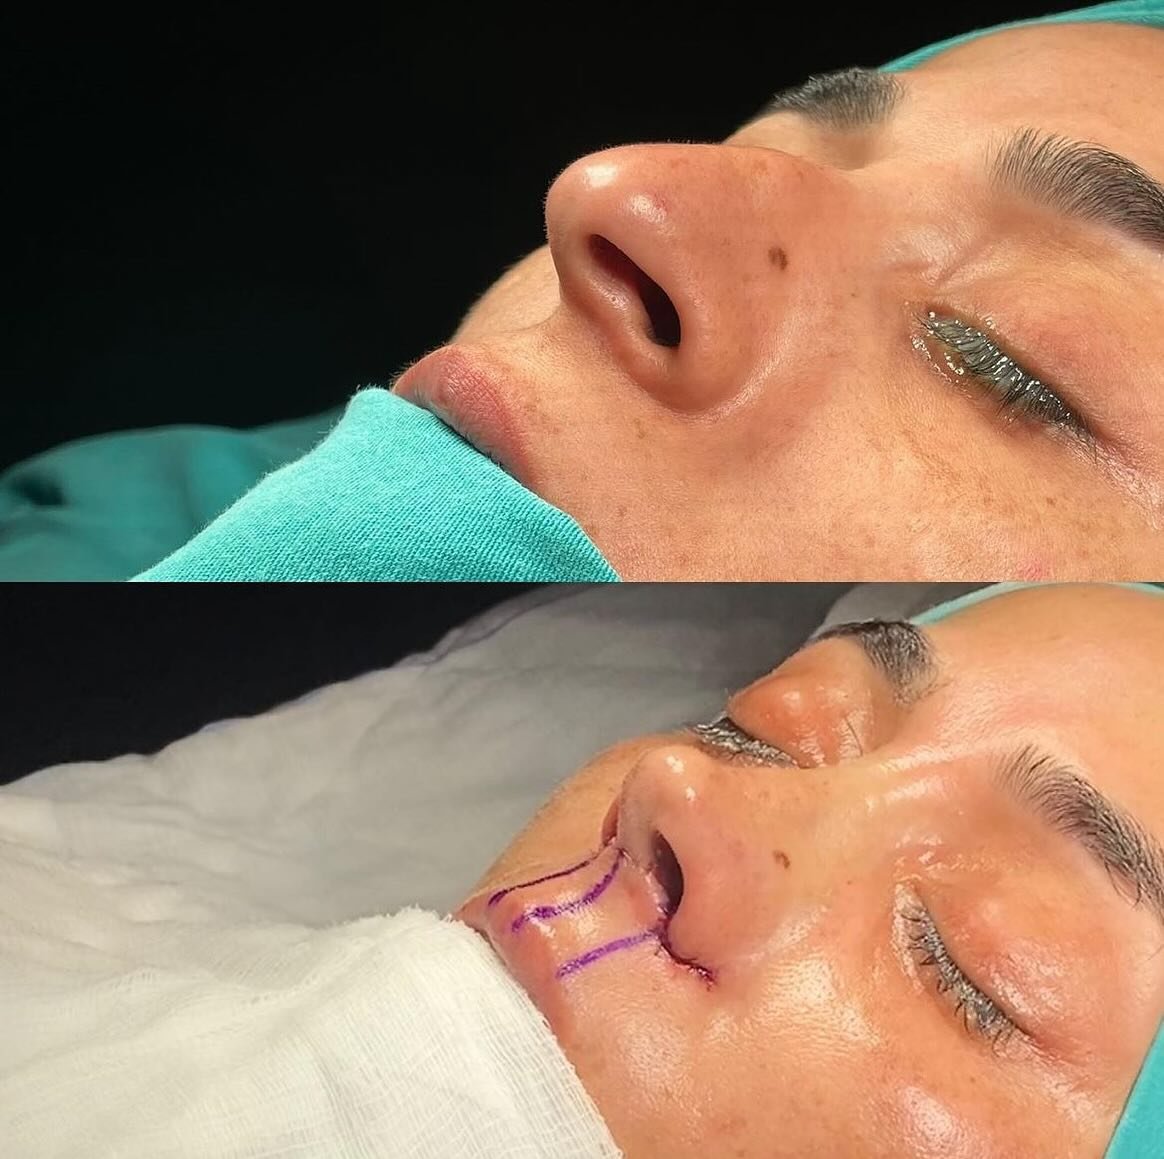 Hello everyone 💛

We would like to share the story of one of our patients from France who underwent rhinoplasty to achieve her desired look. She was very excited about the procedure and it was important for her to feel her best self. We are thrilled